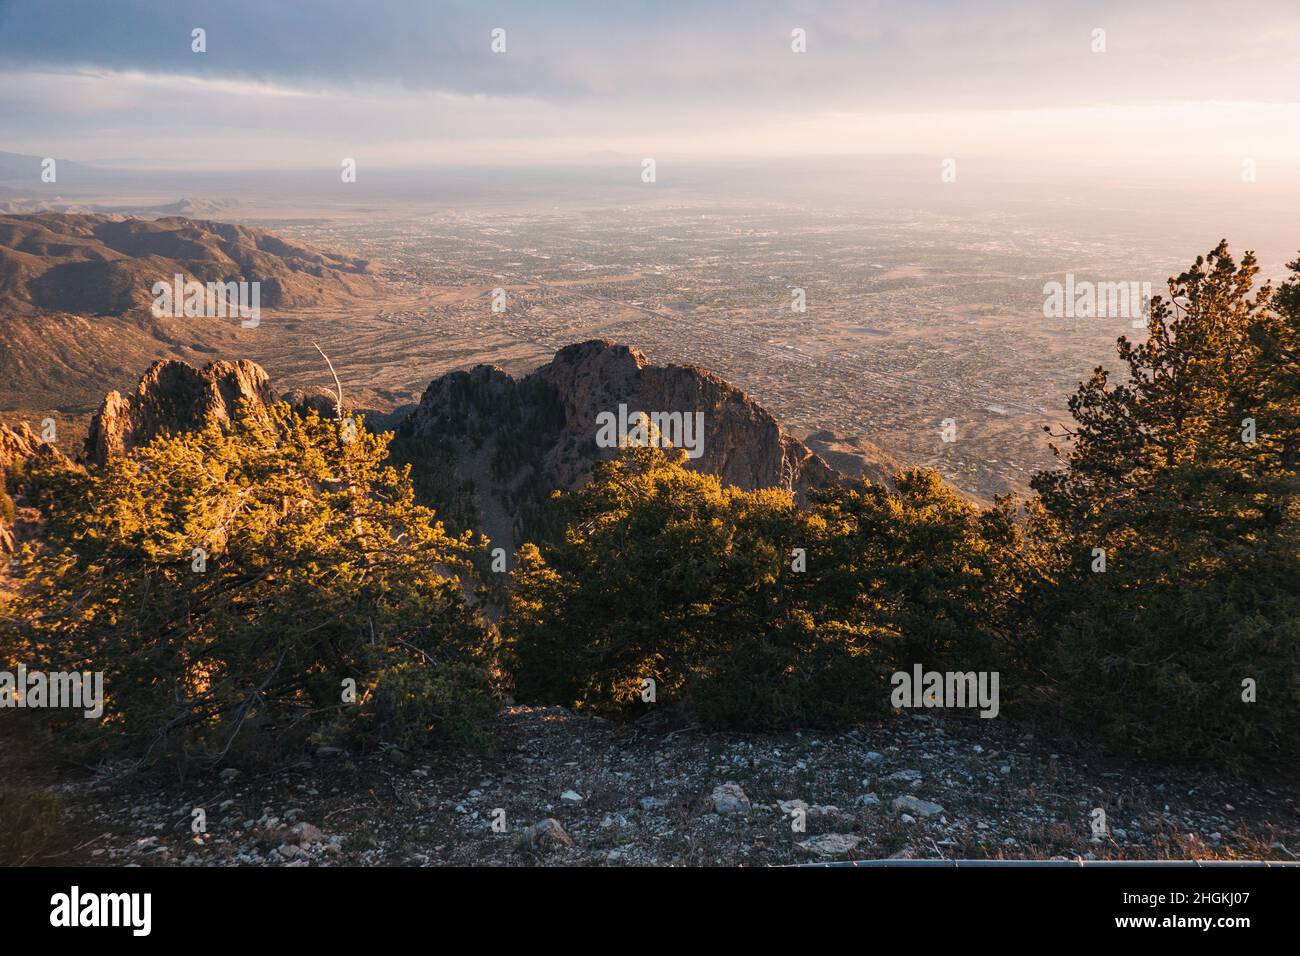 the city of Albuquerque, New Mexico, as seen from the top of the Sandia Mountains at sunset Stock Photo